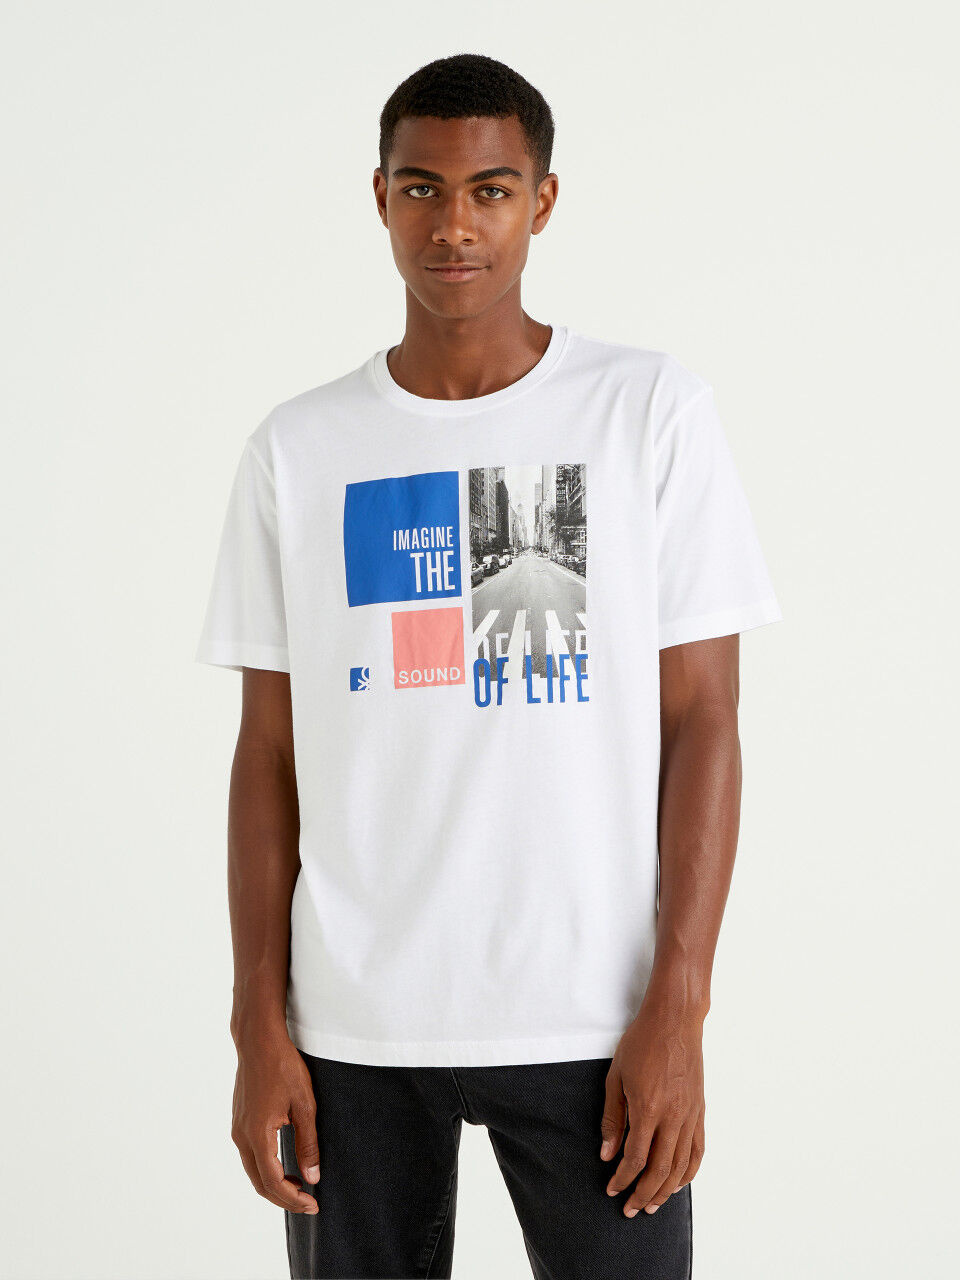 Men's T-shirts New Collection 2022 | Benetton